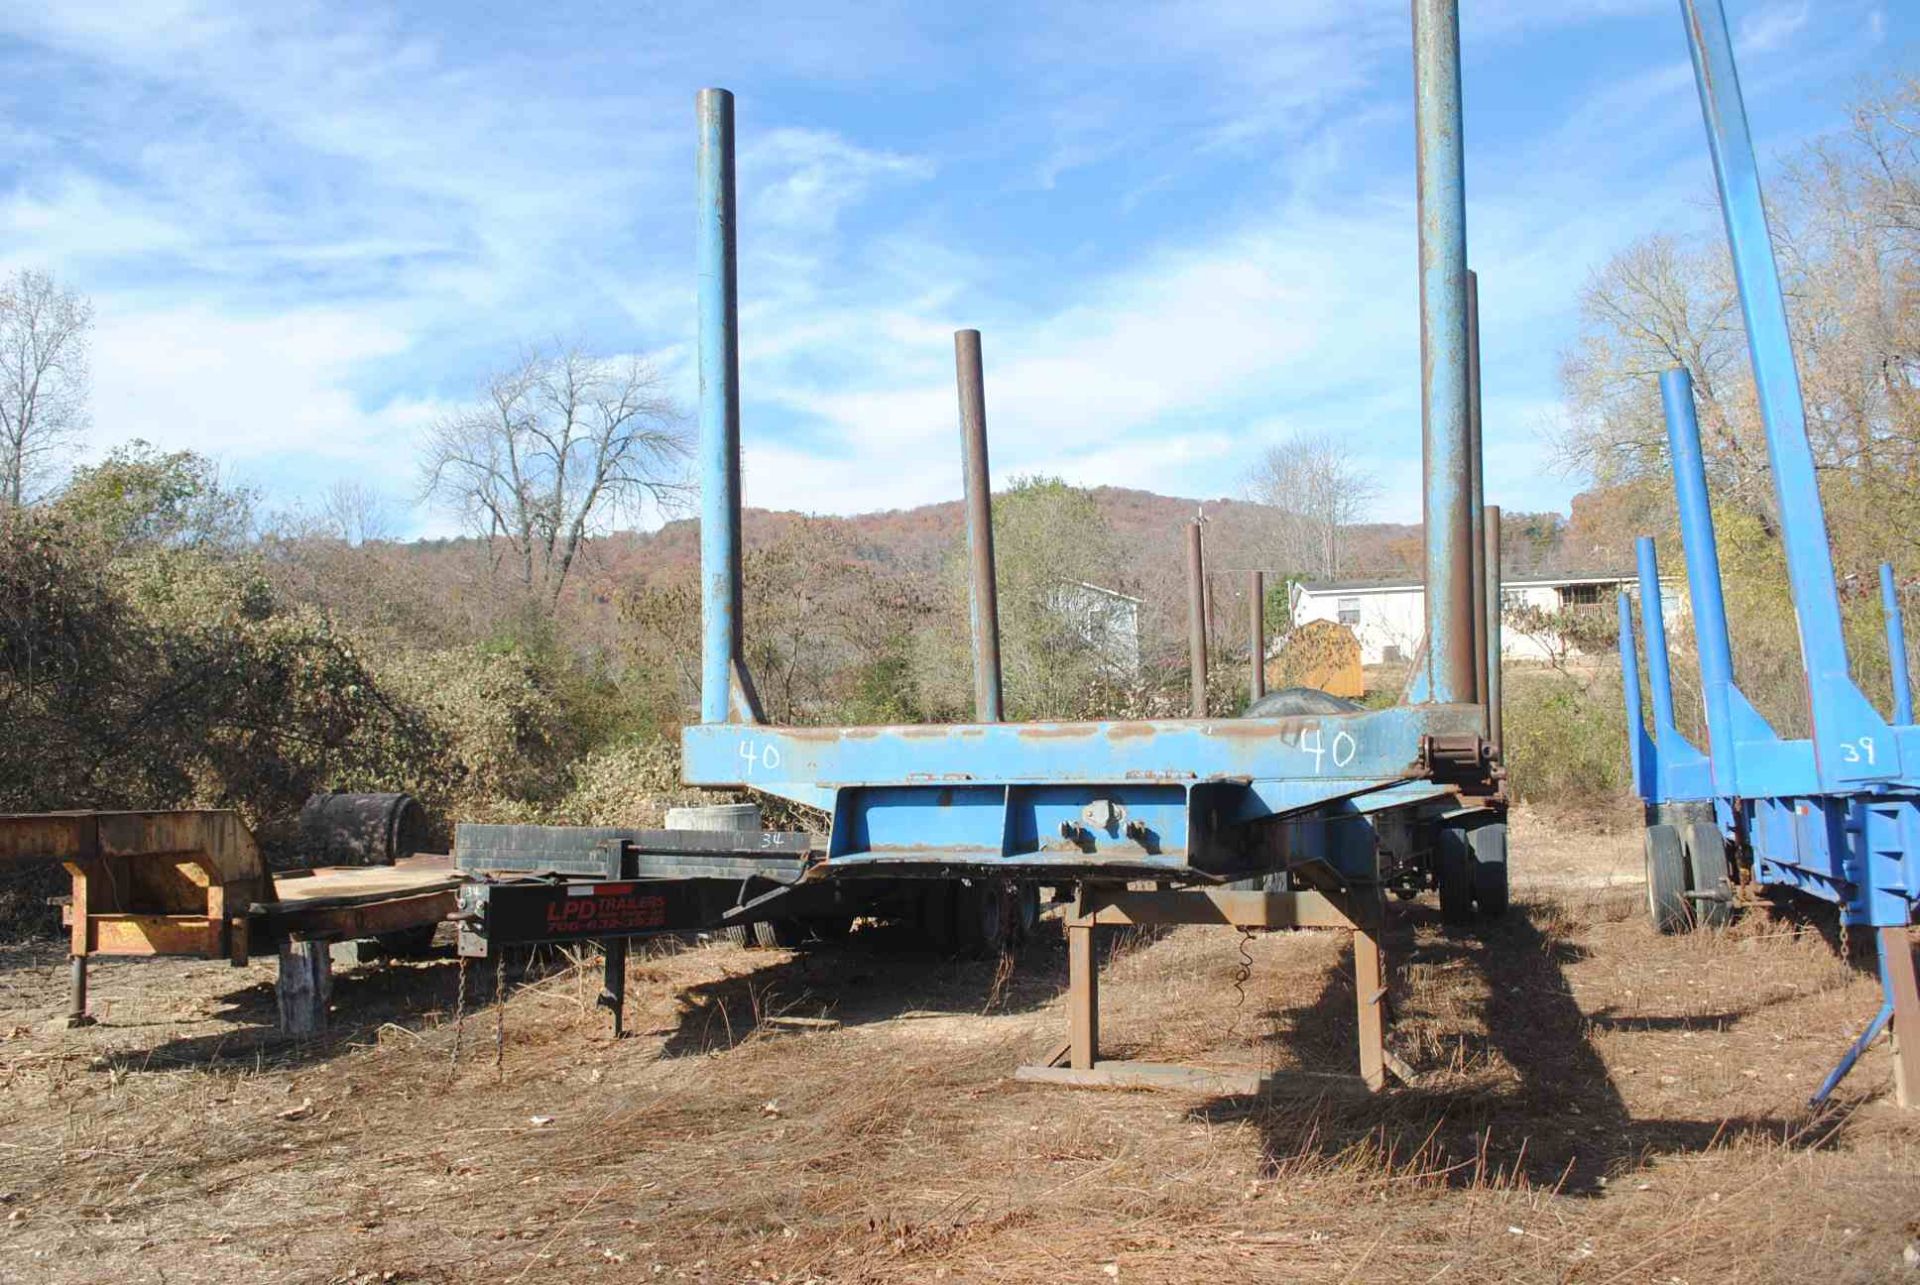 40' DOUBLE BUNK LOG TRAILER; NO TITLE, BILL OF SALE ONLY